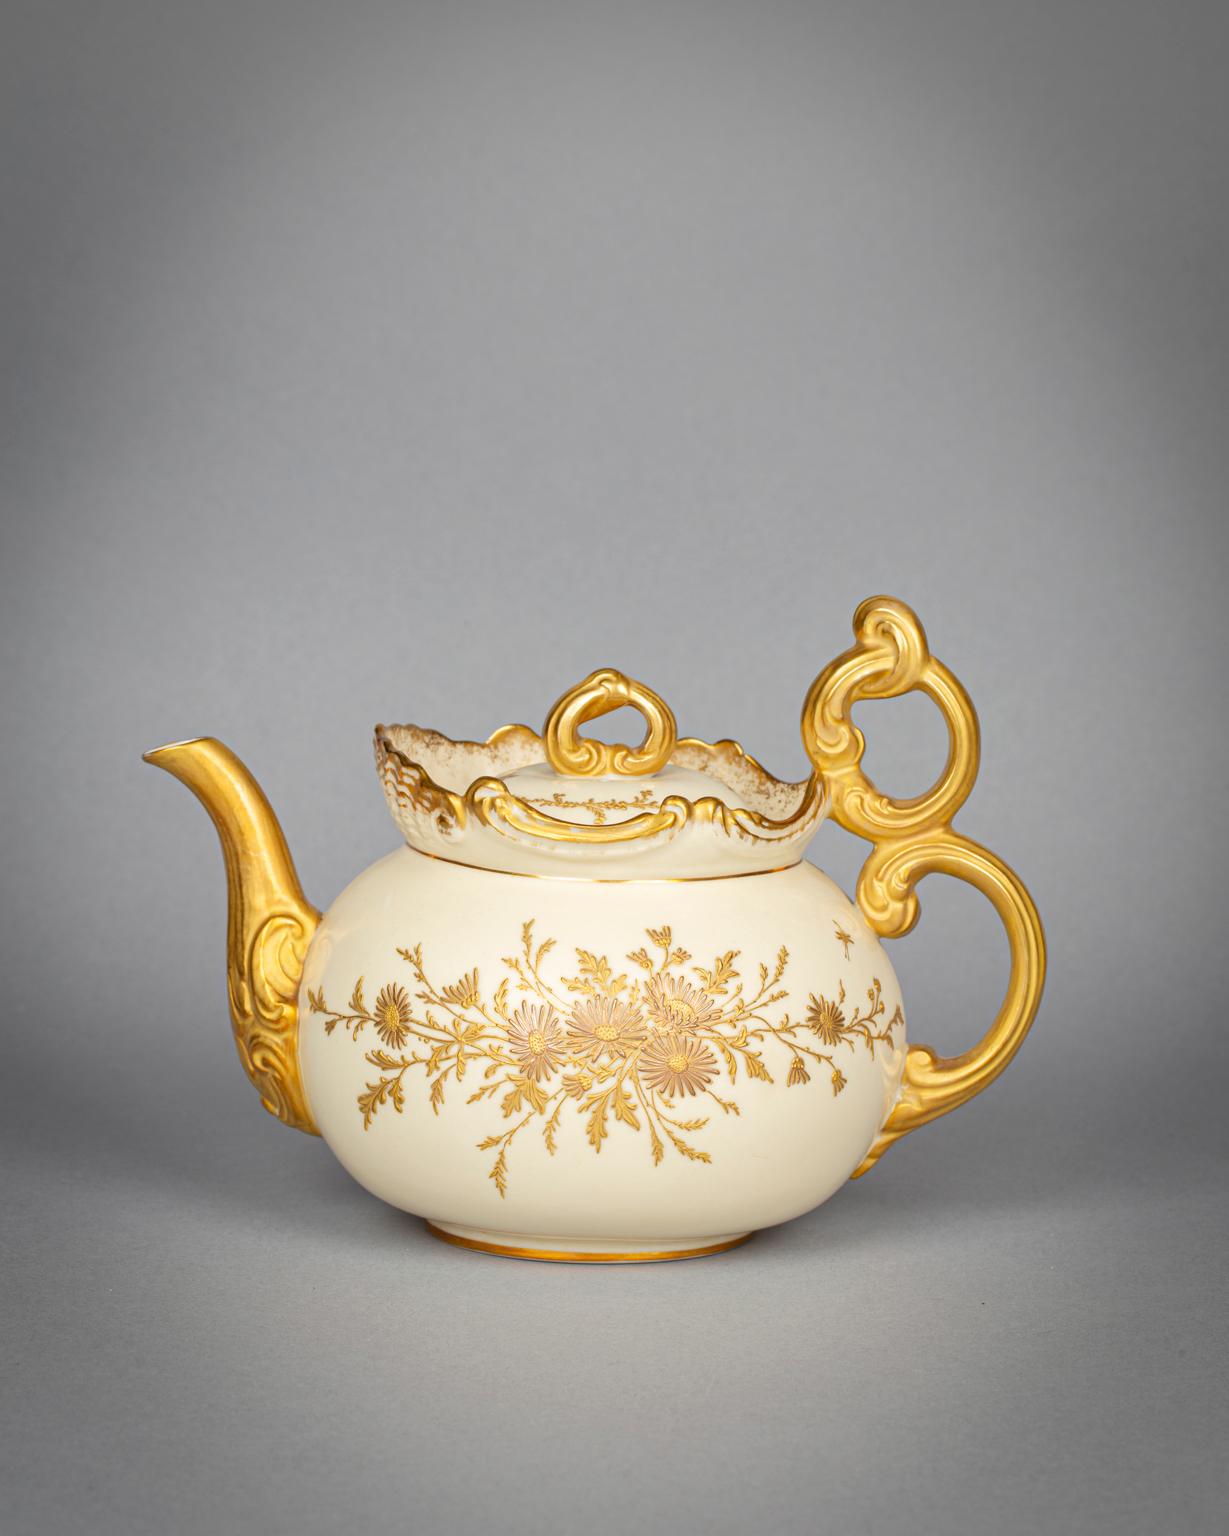 A Large Belleek Willets Porcelain Tea Service, circa 1890 In Good Condition For Sale In New York, NY